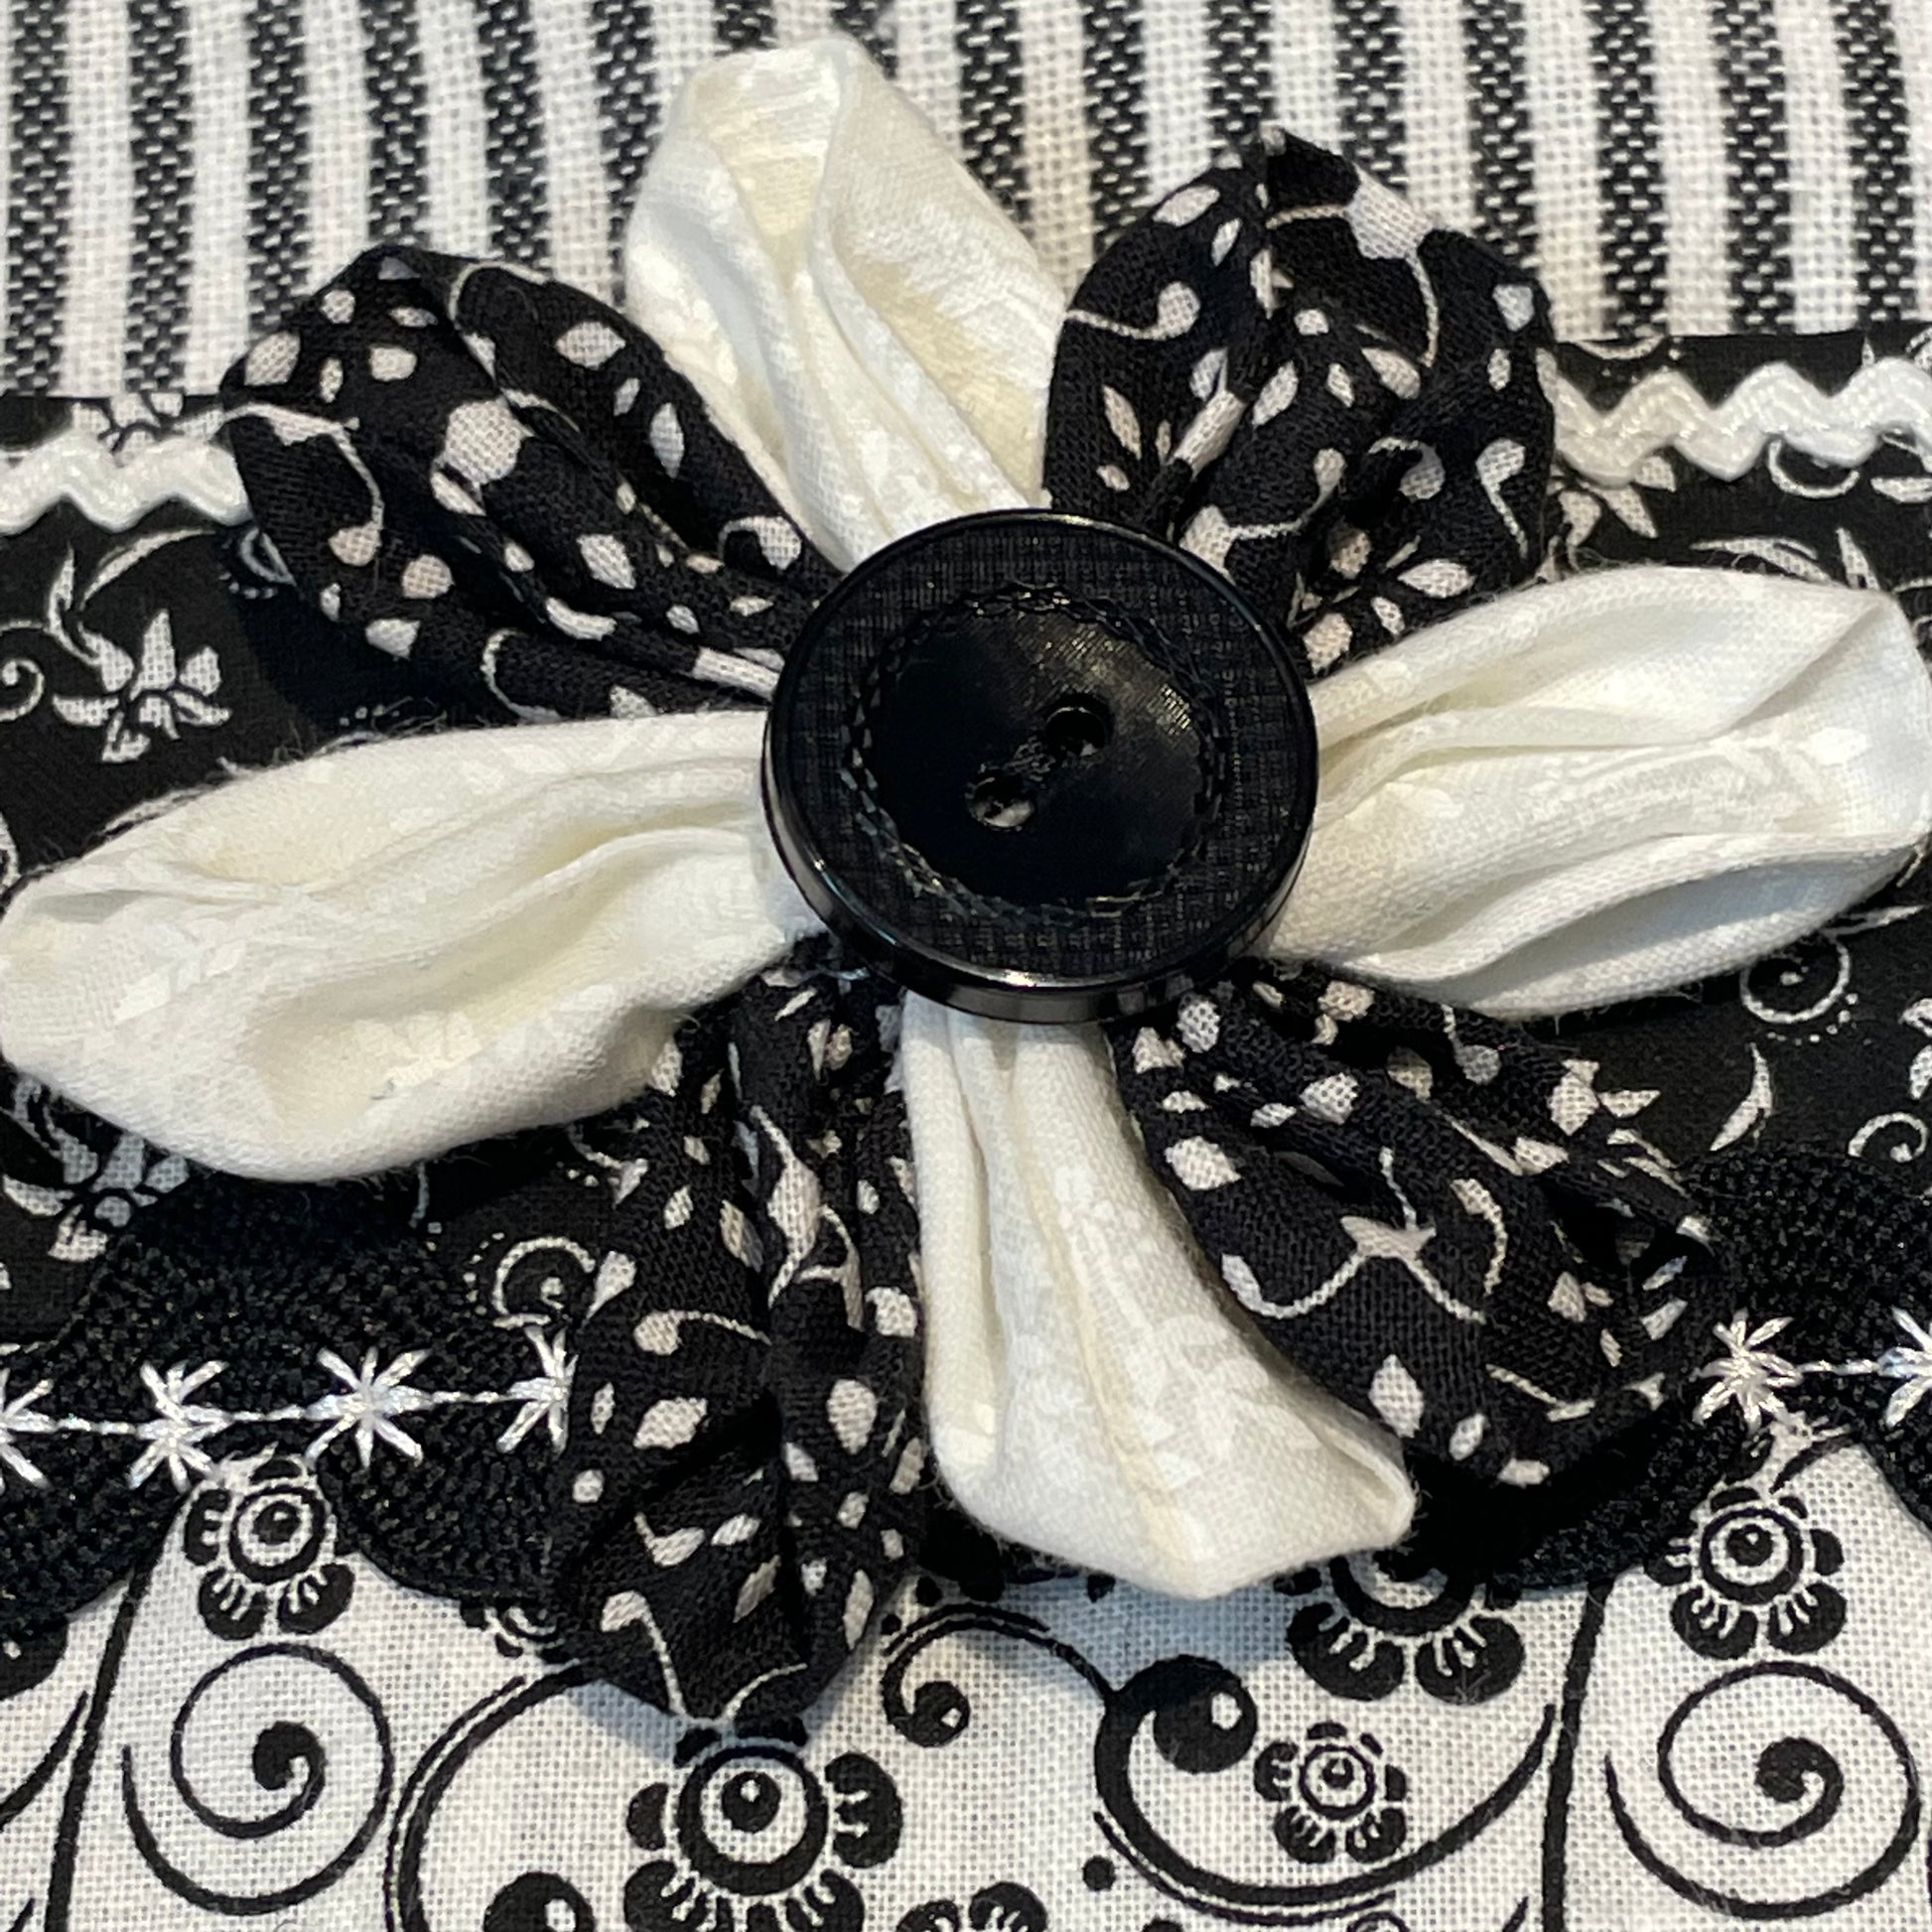 Black and white retro farmhouse tea towel. Featuring black and white striped toweling. Black and white floral quilting cotton accents with white and black ric rac, a handcrafted flower with button center and embroidery stitching. Part of a coordinating collection of farmhouse decor. Browse the entire collection. Then head over to the Home Stitchery Decor YouTube Channel for more Farmhouse DIY Decor Fun. See you there!